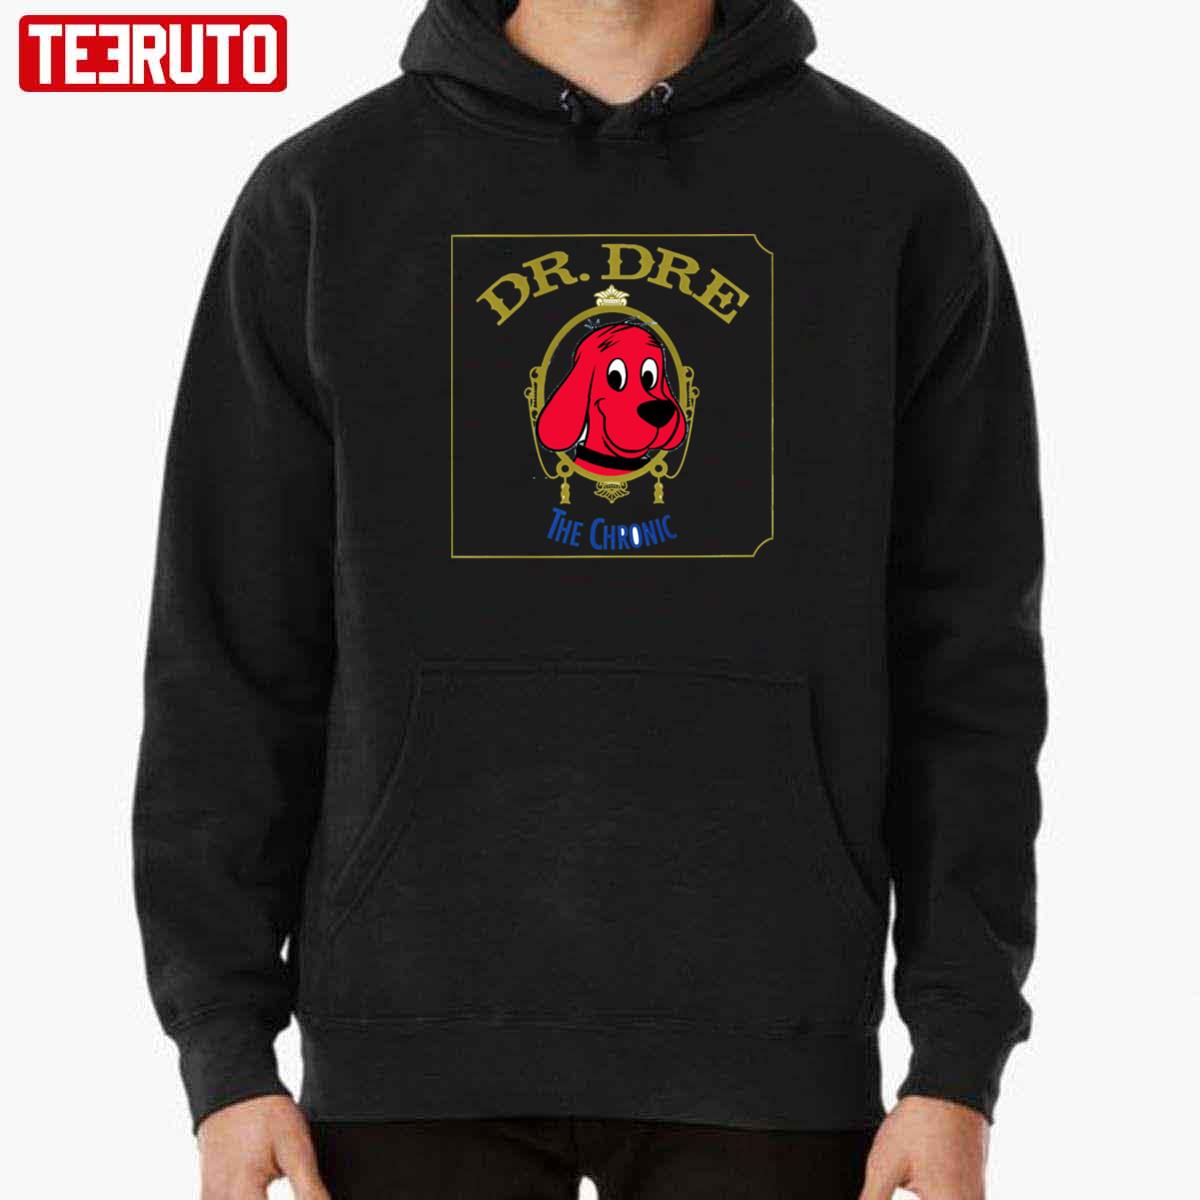 Clifford The Big Red Dog 2001 Dr Dre The Chronic Unisex Hoodie